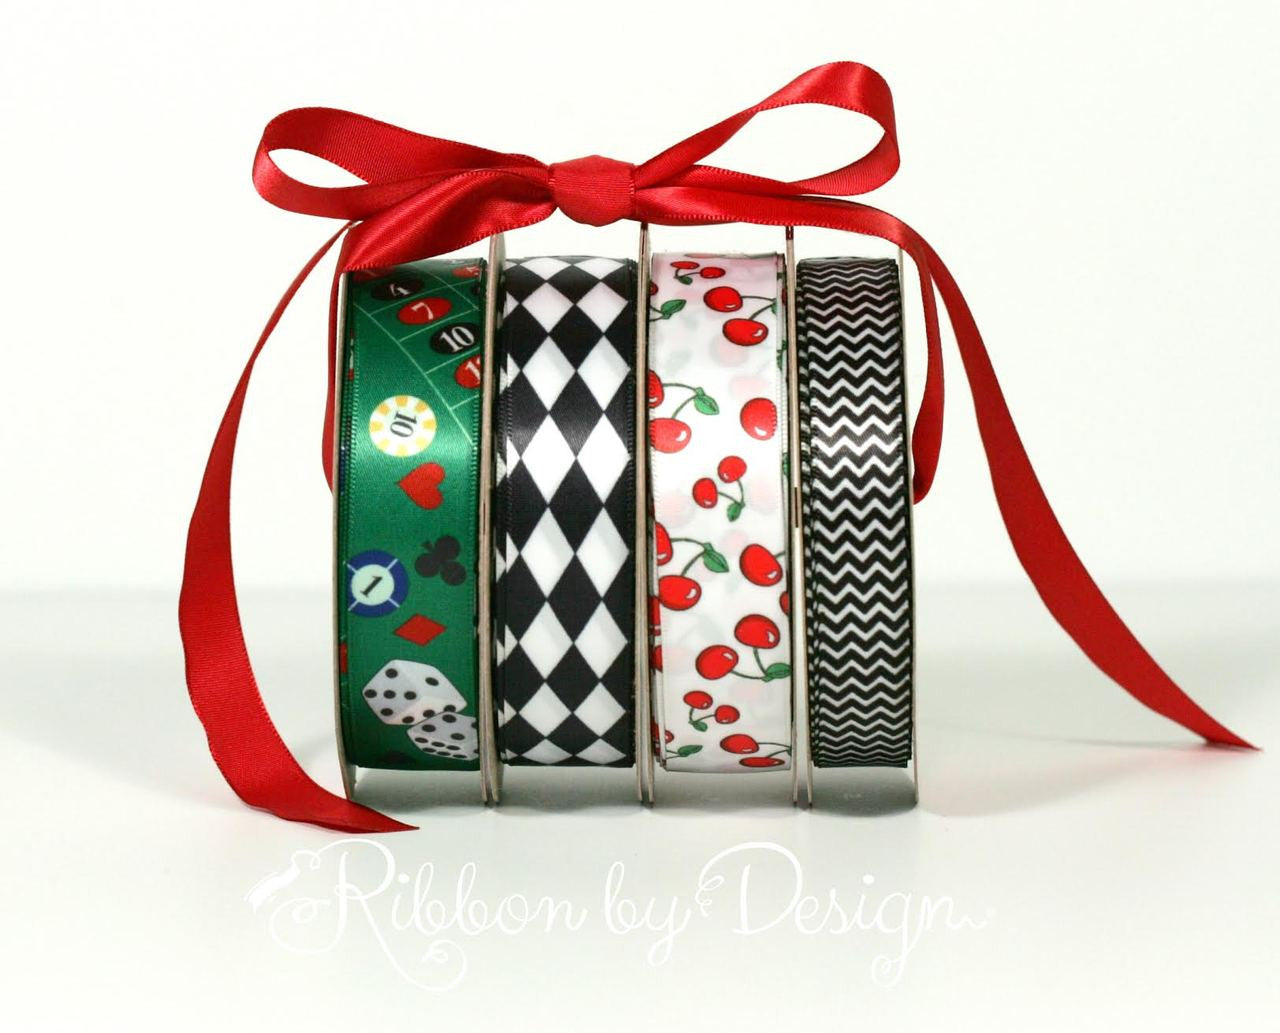 Casino theme ribbon mixes so nicely with our black and white chevron and harlequin along with the cherries!